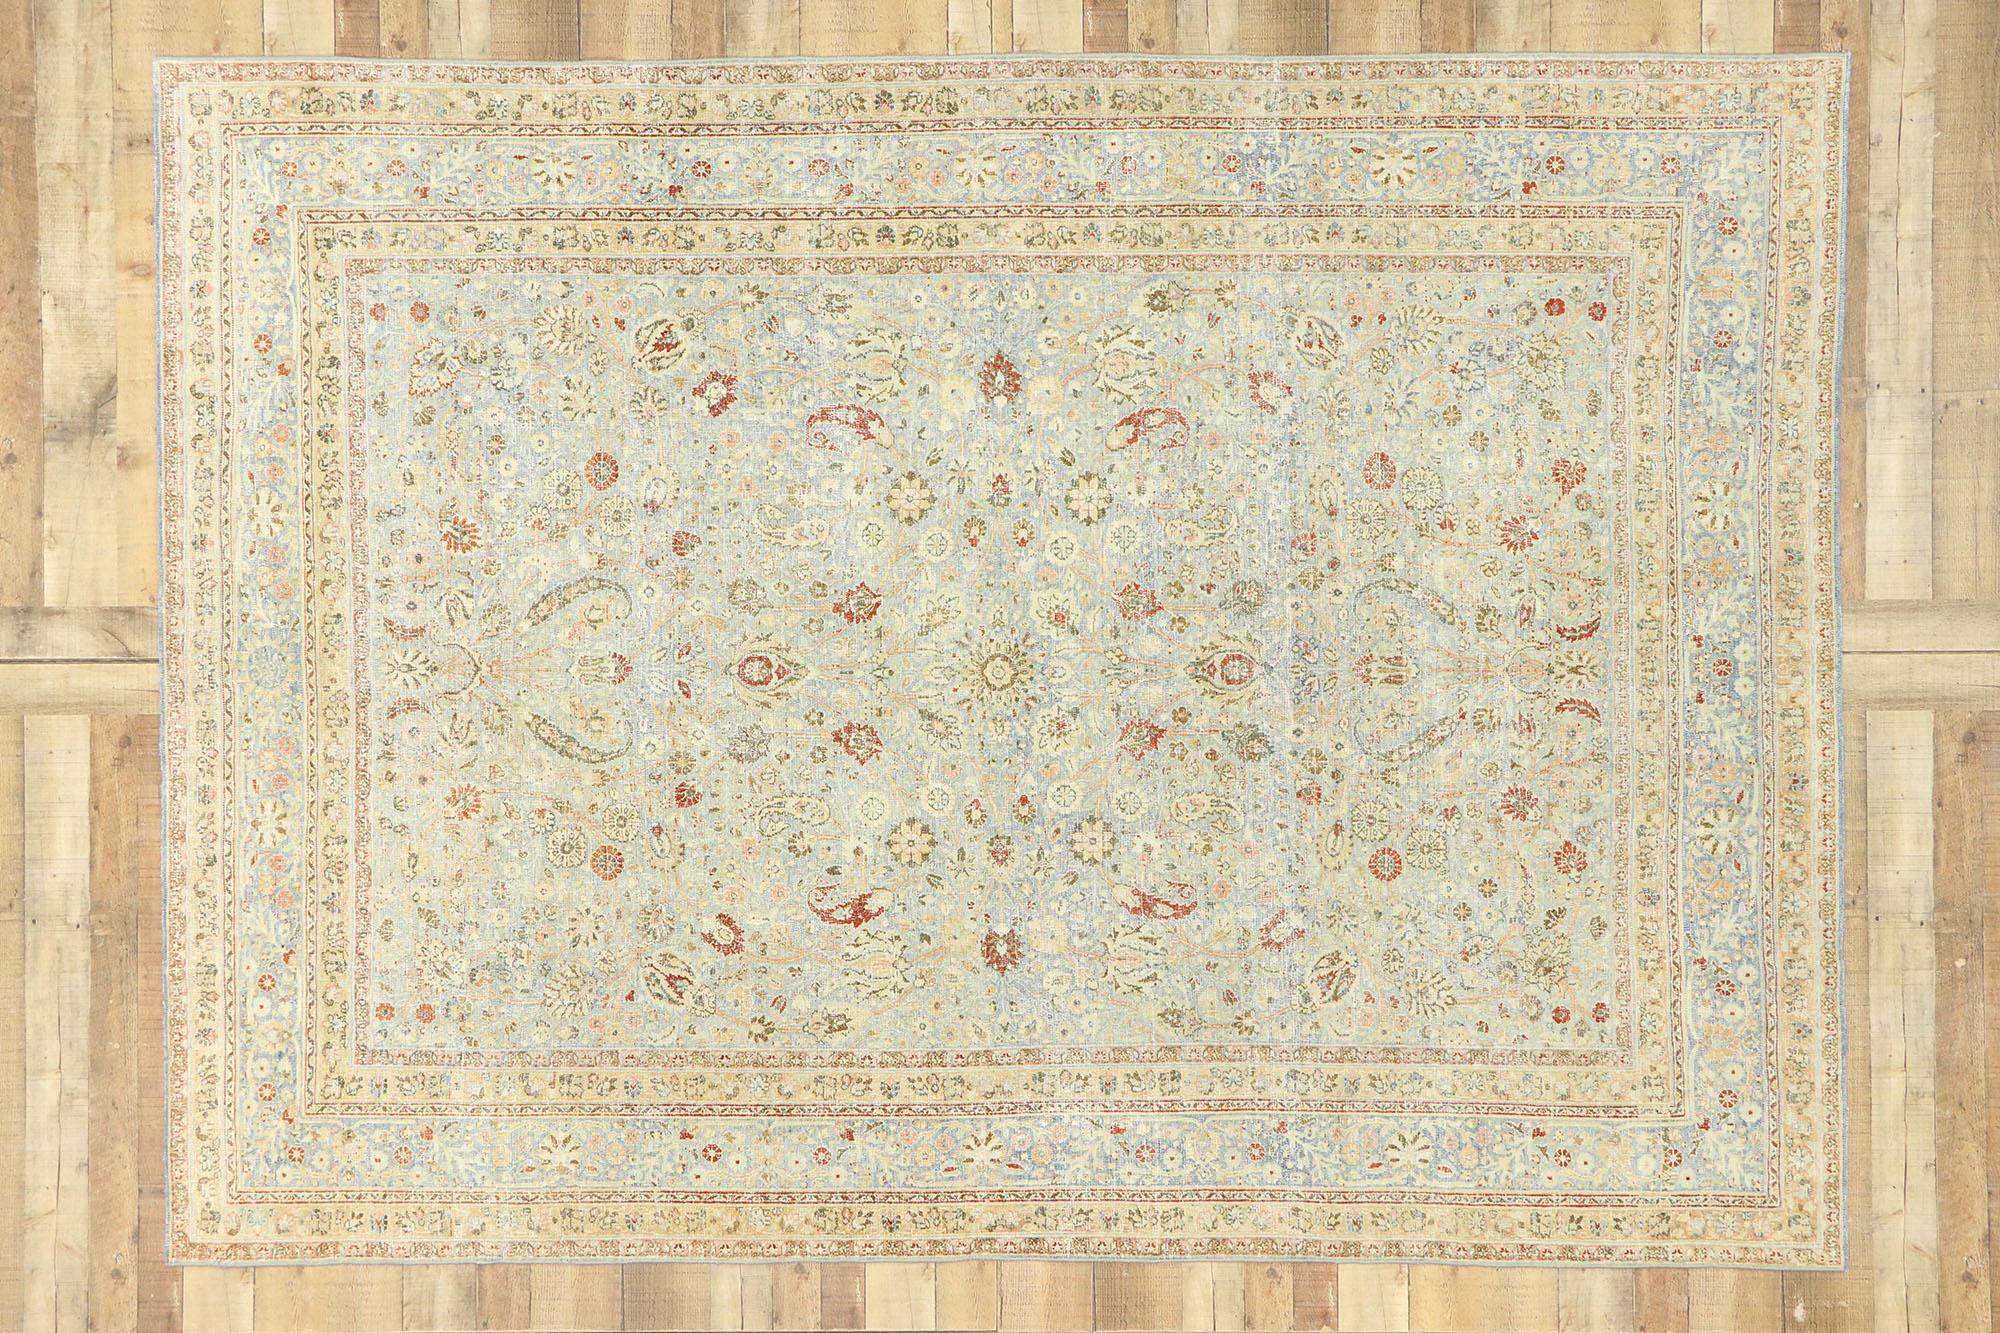 Distressed Antique Persian Khorassan Rug with Rustic English Manor Style For Sale 2